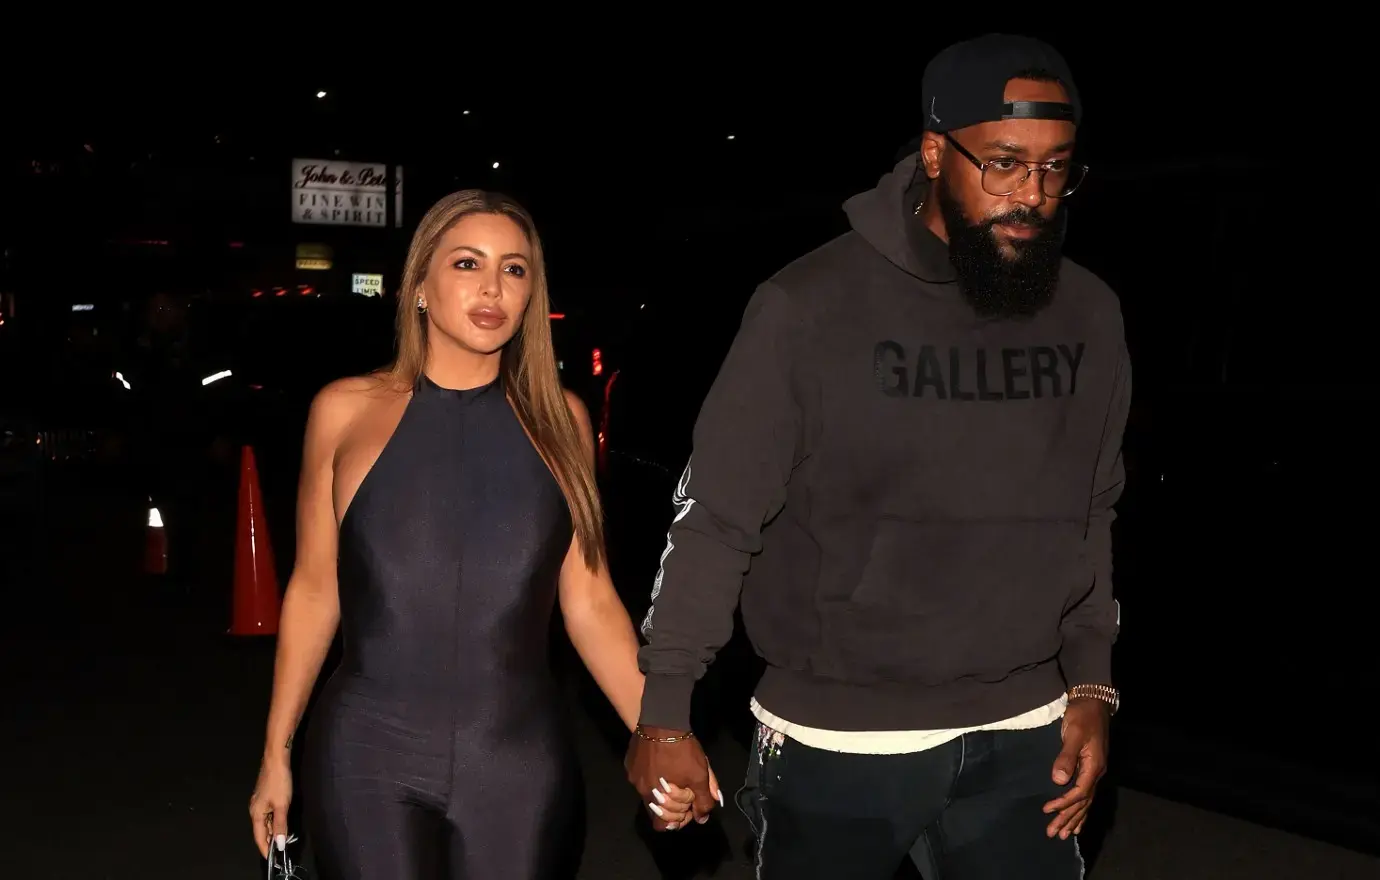 Larsa Pippen cuddles up to Marcus Jordan in loved-up photos during